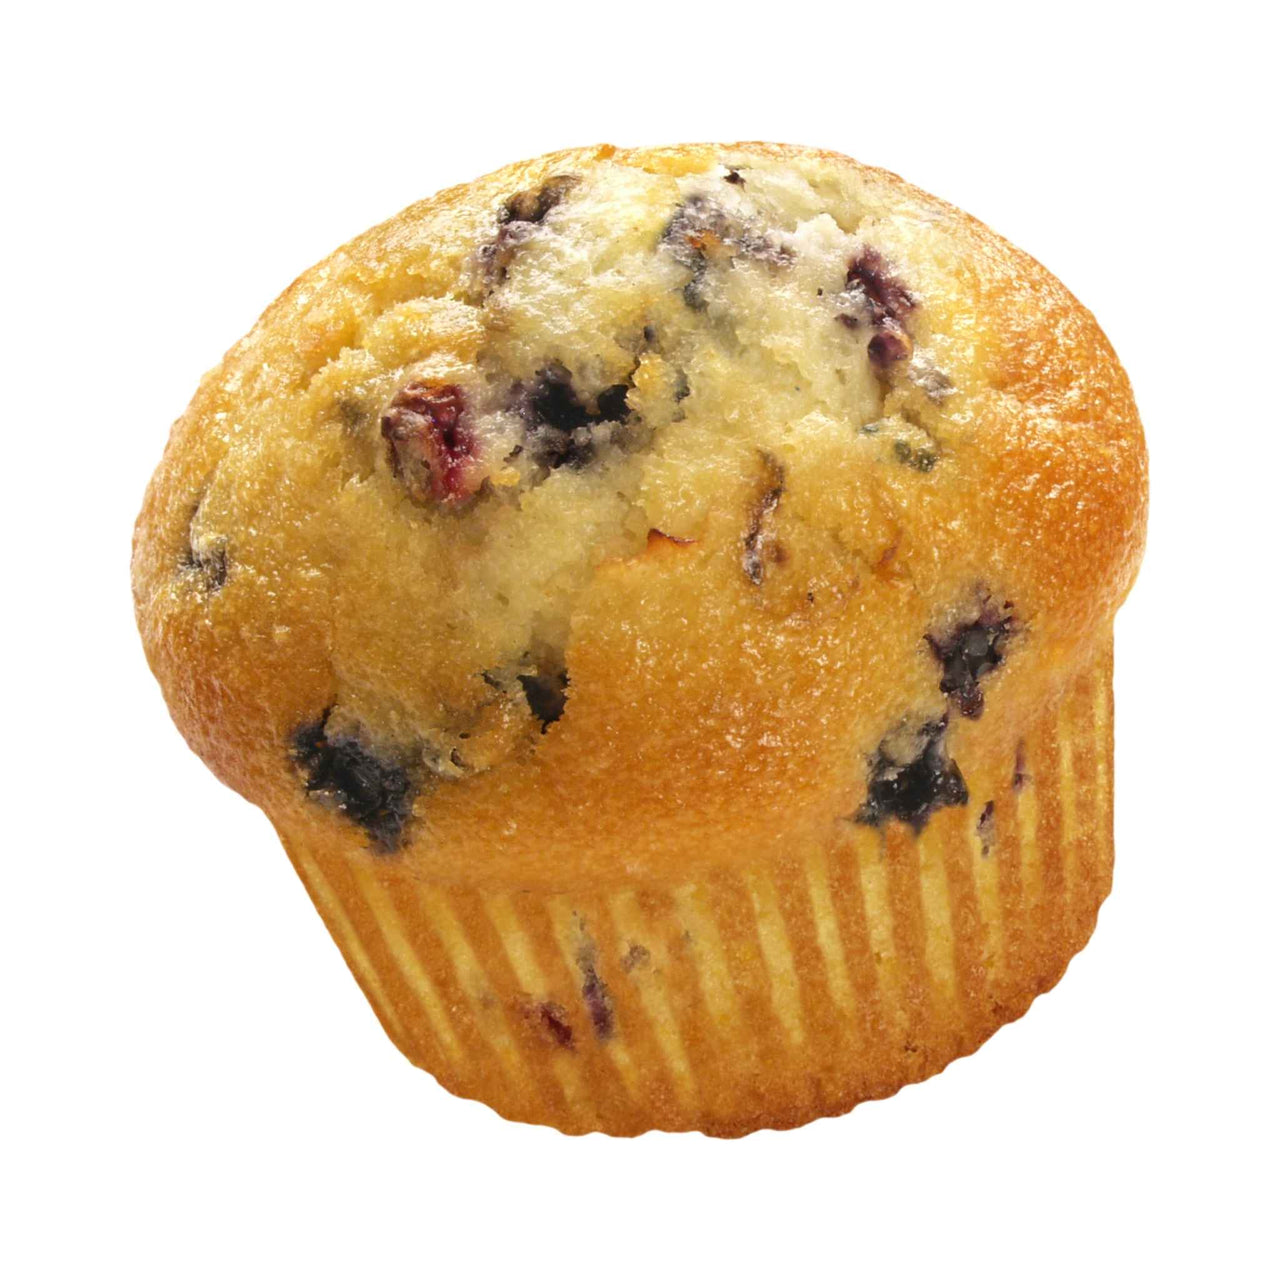 Image of Blueberry Muffins - 2 x 1.1 Kilos